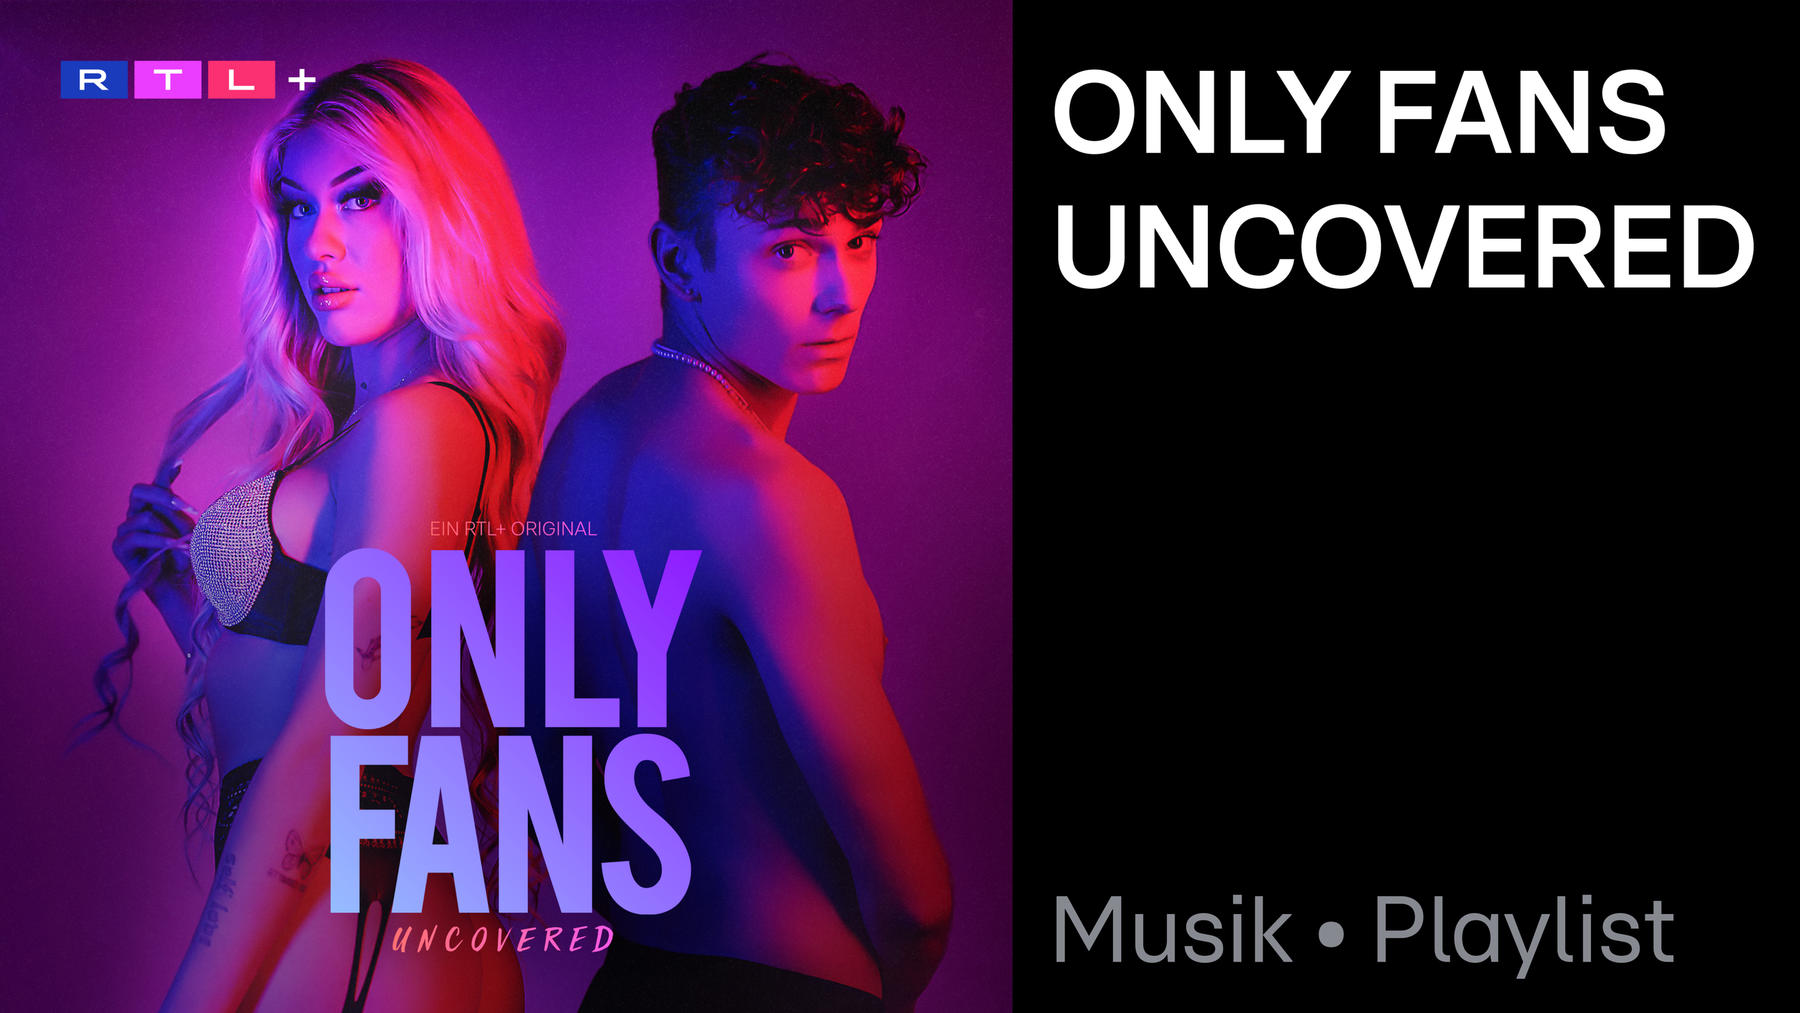 Soundtrack: Only Fans Uncovered